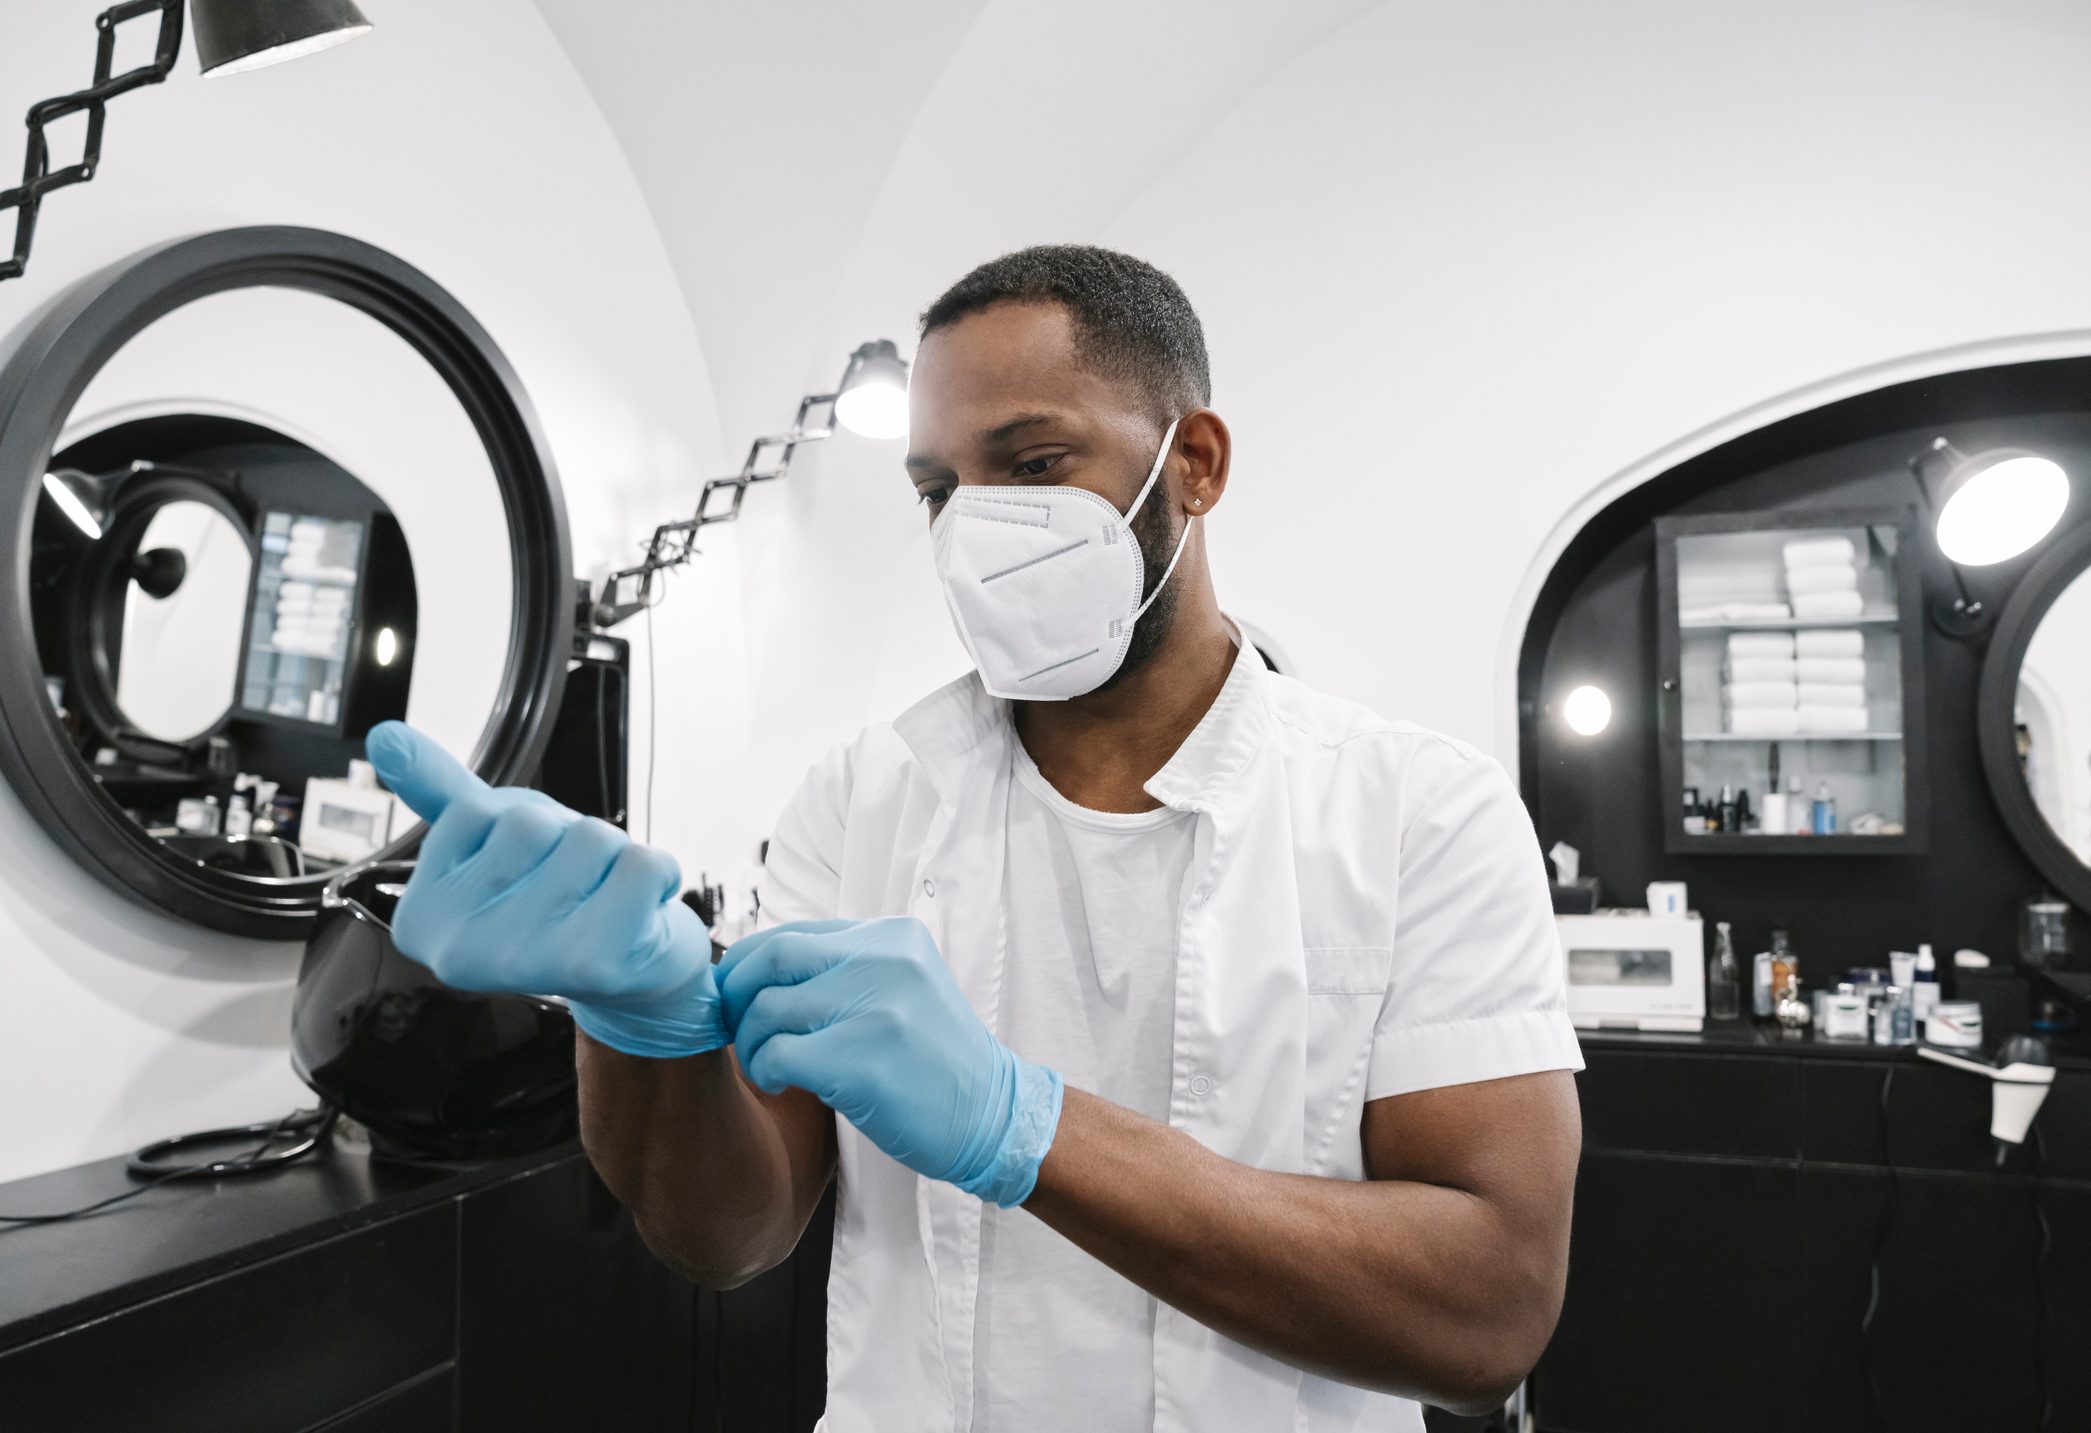 Barber wearing surgical mask putting on reusable gloves